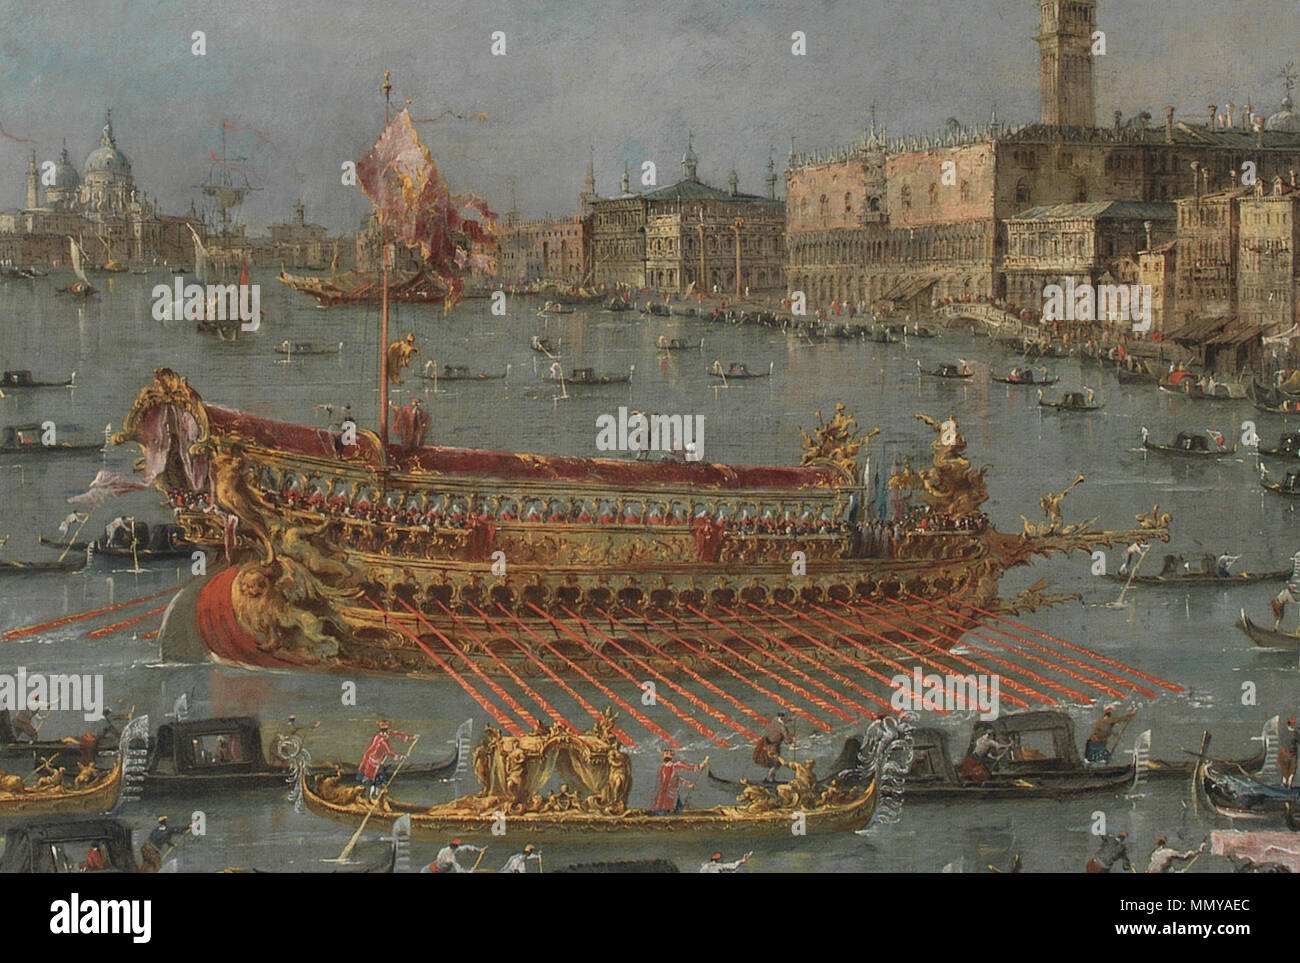 The Bucintoro Festival of Venice. The Bacino di S. Marco with the 'Bucintoro', the Doge's State Barge, on Ascension Day. between 1780 and 1793. Guardi, Francesco - Bucintoro-detail Stock Photo